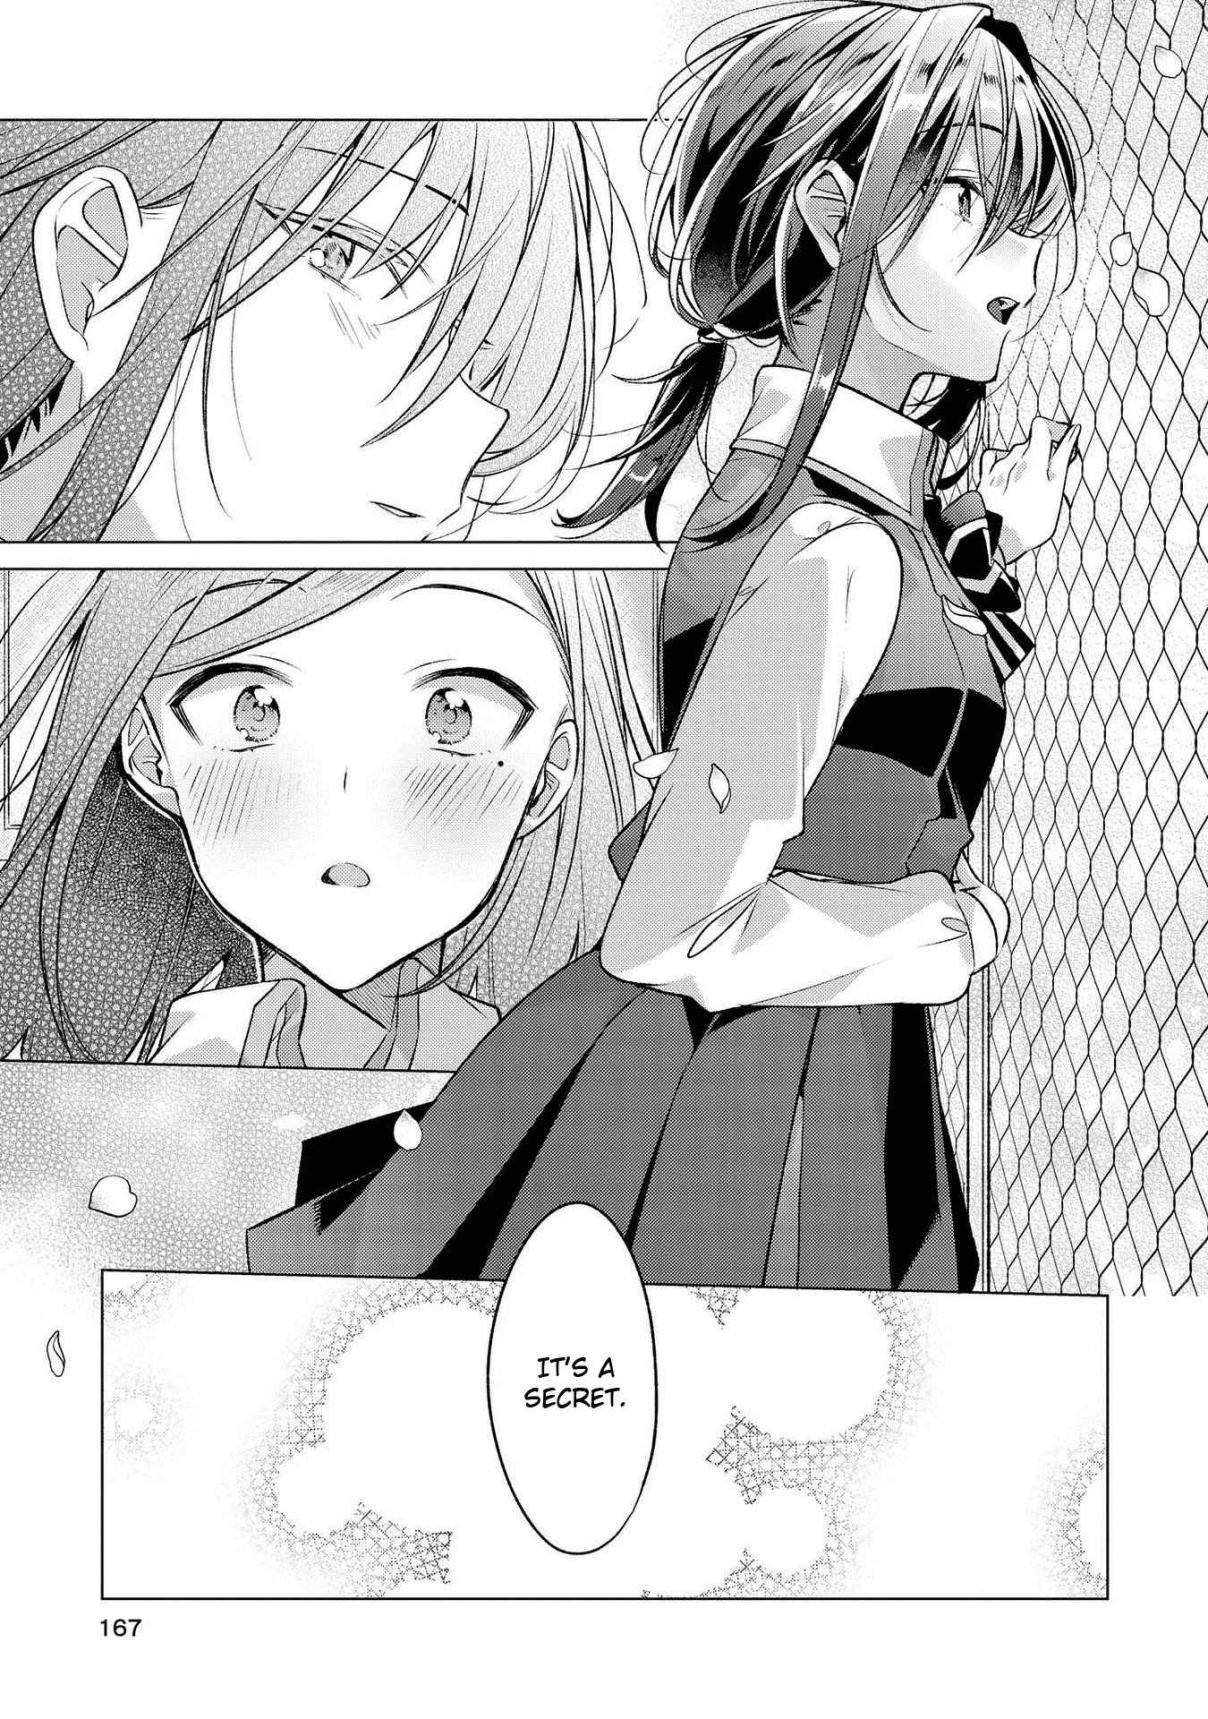 Whispering You a Love Song Vol. 1 Ch. 5.5 Volume 1 Extras